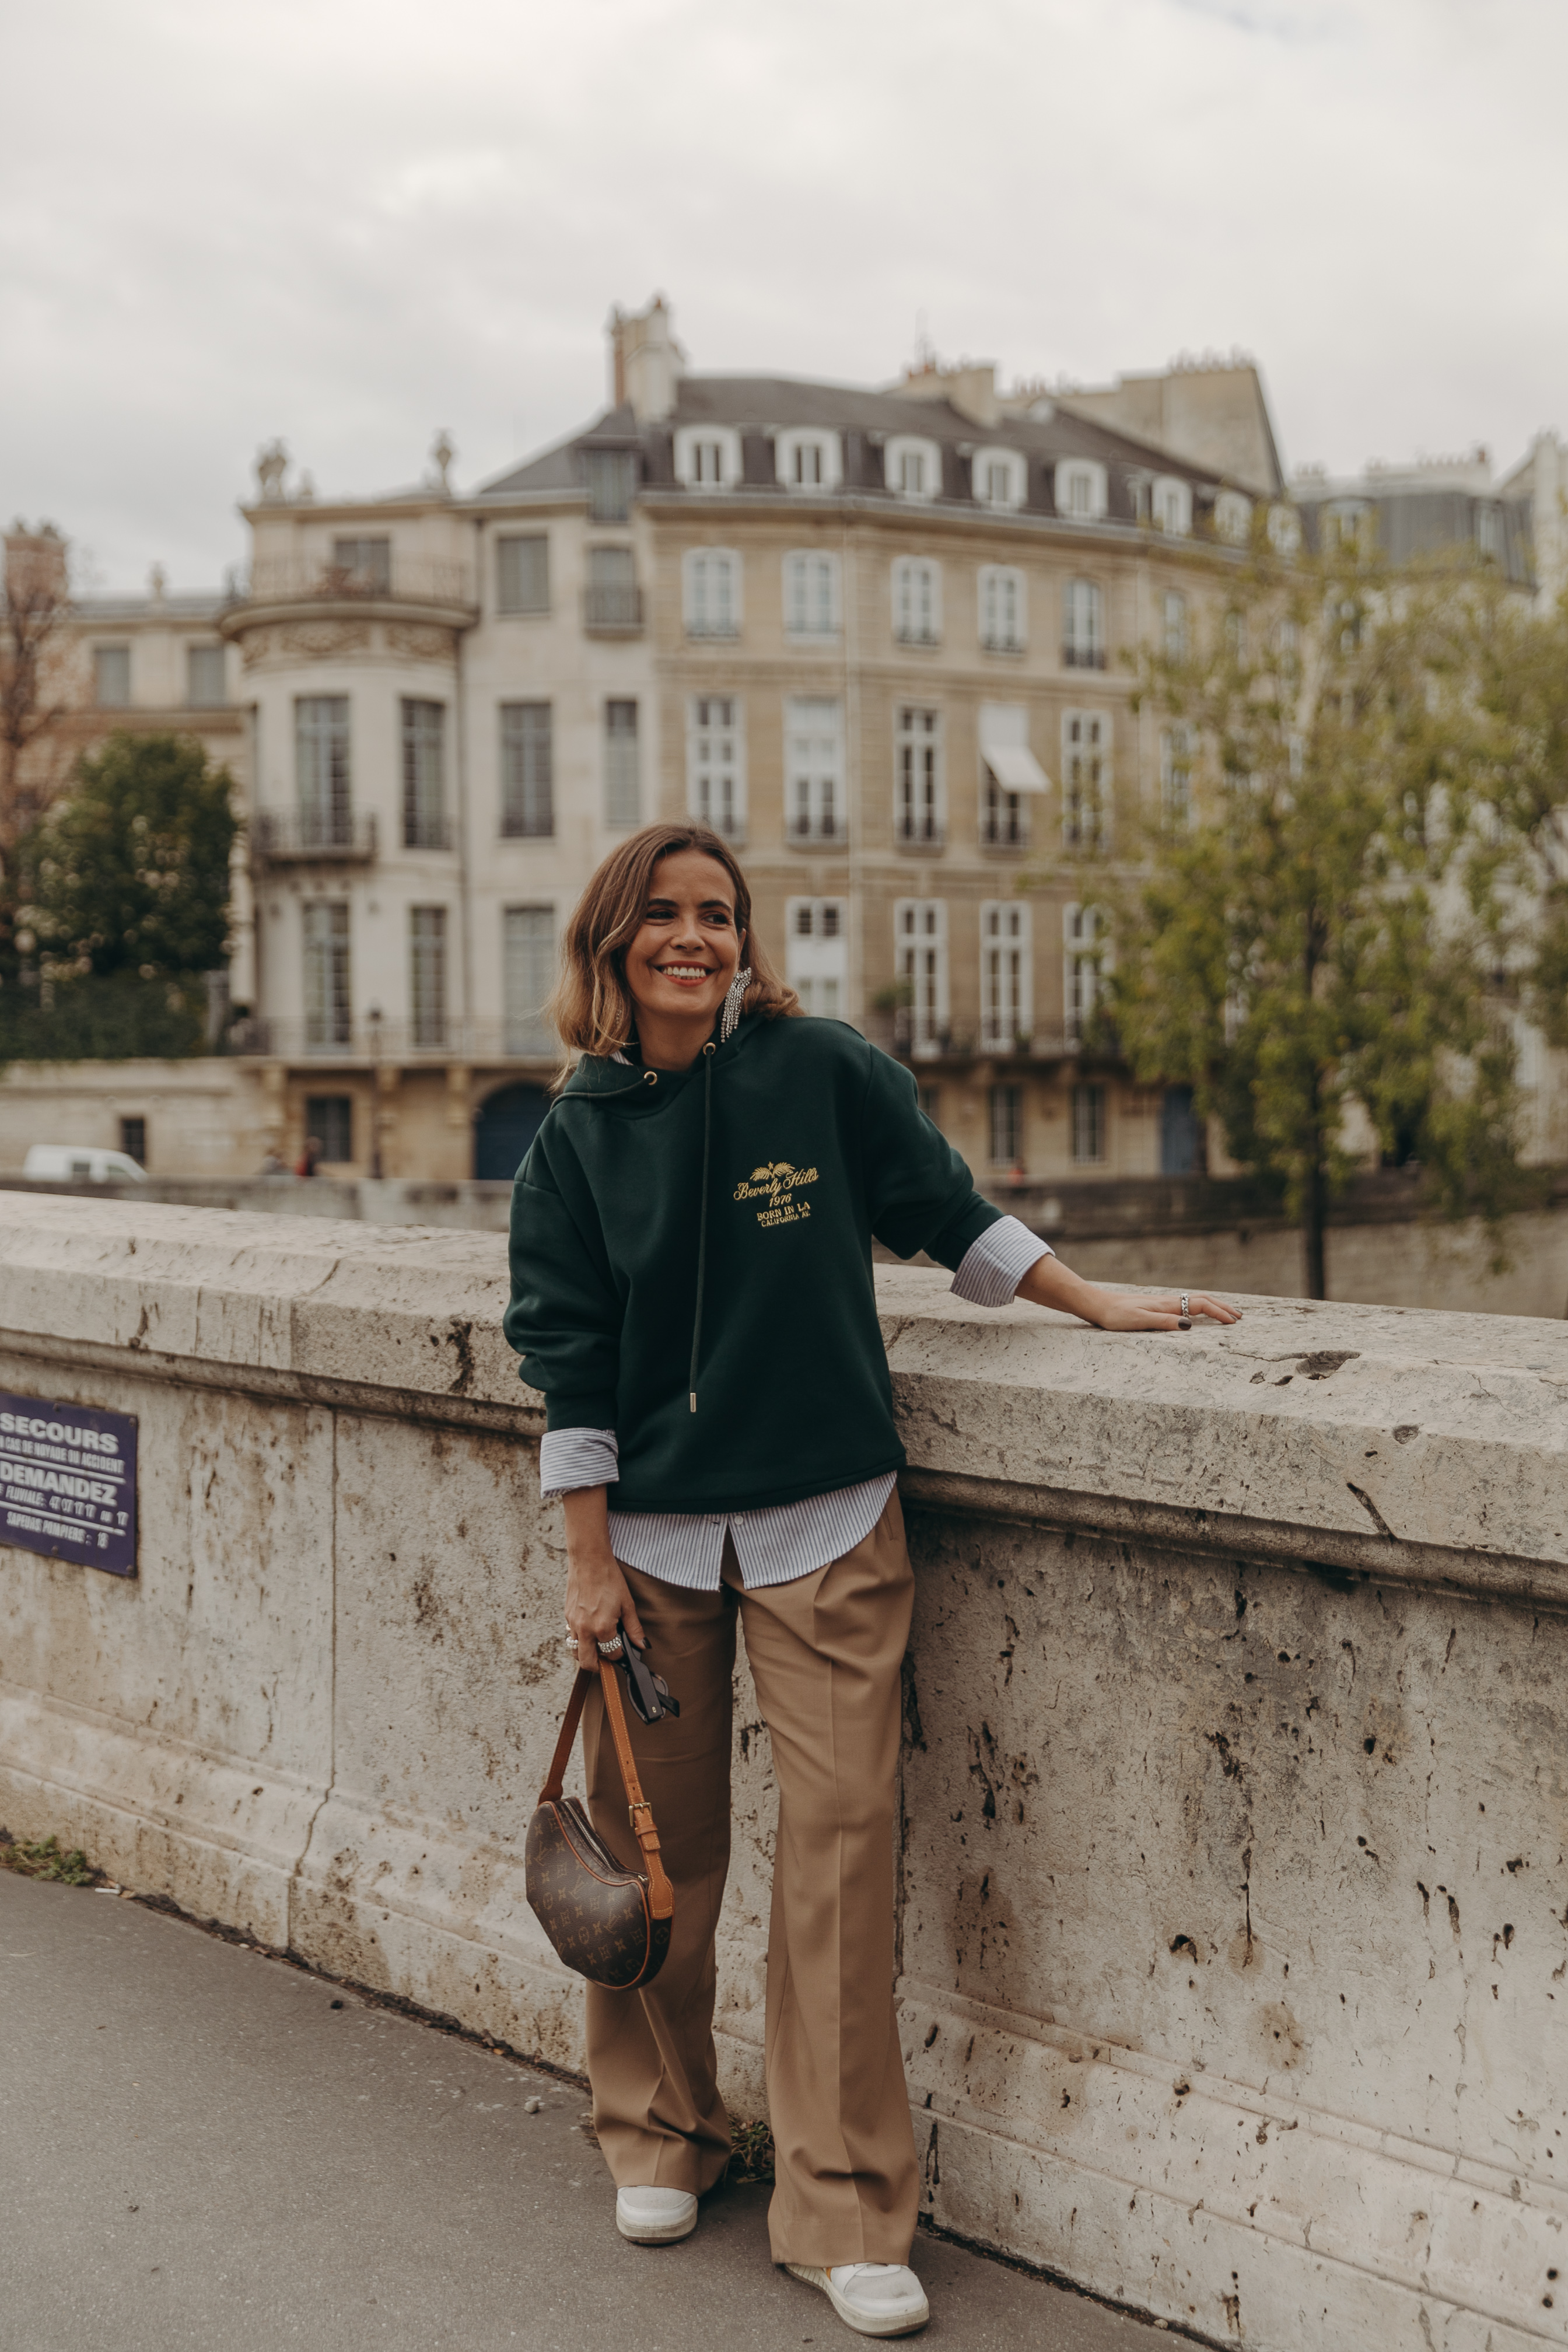 Sara from Collage Vintage at Paris Fashion Week wearing a oversize green sweatshirt, camel trousers, Louis Vuitton vintage bag and sneakers.